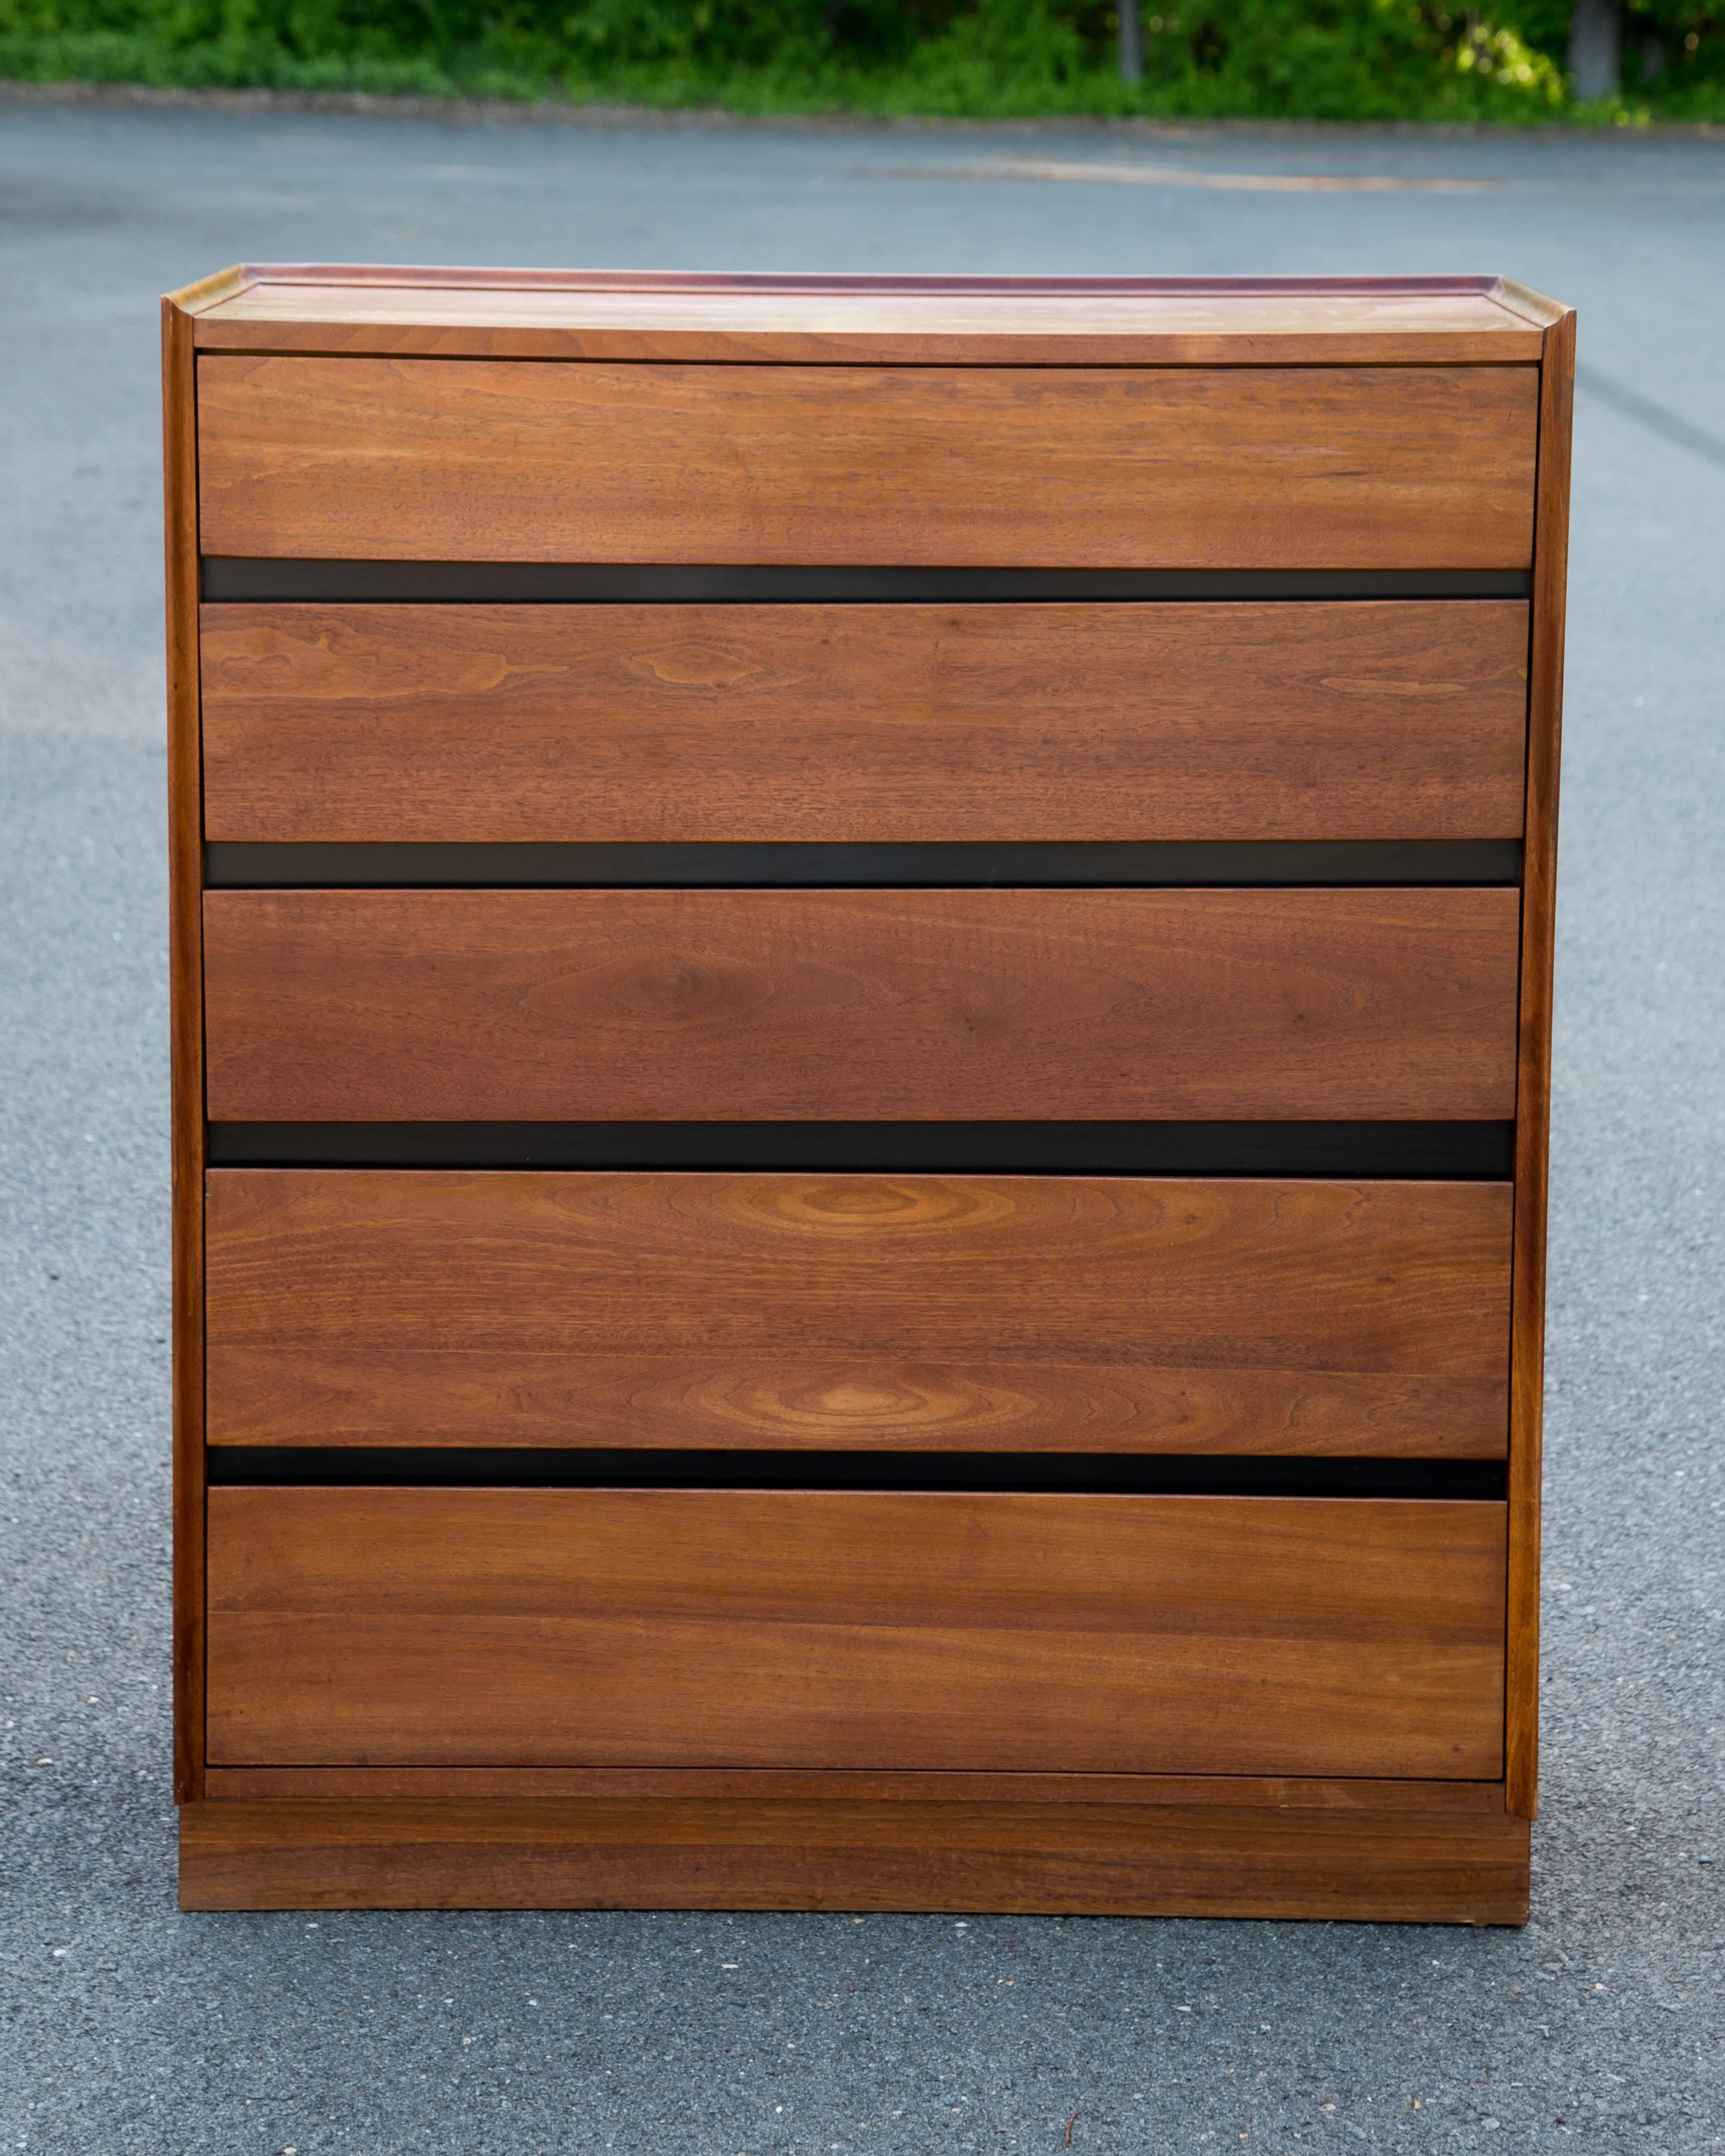 Sleek Mid-Century modern walnut highboy dresser and matching pair of night stands, Dillingham Esprit is the maker, often attributed to Milo Baughman but in fact designed by Merton L. Gershun.
Walnut wood grain with black framed drawers.
Highboy